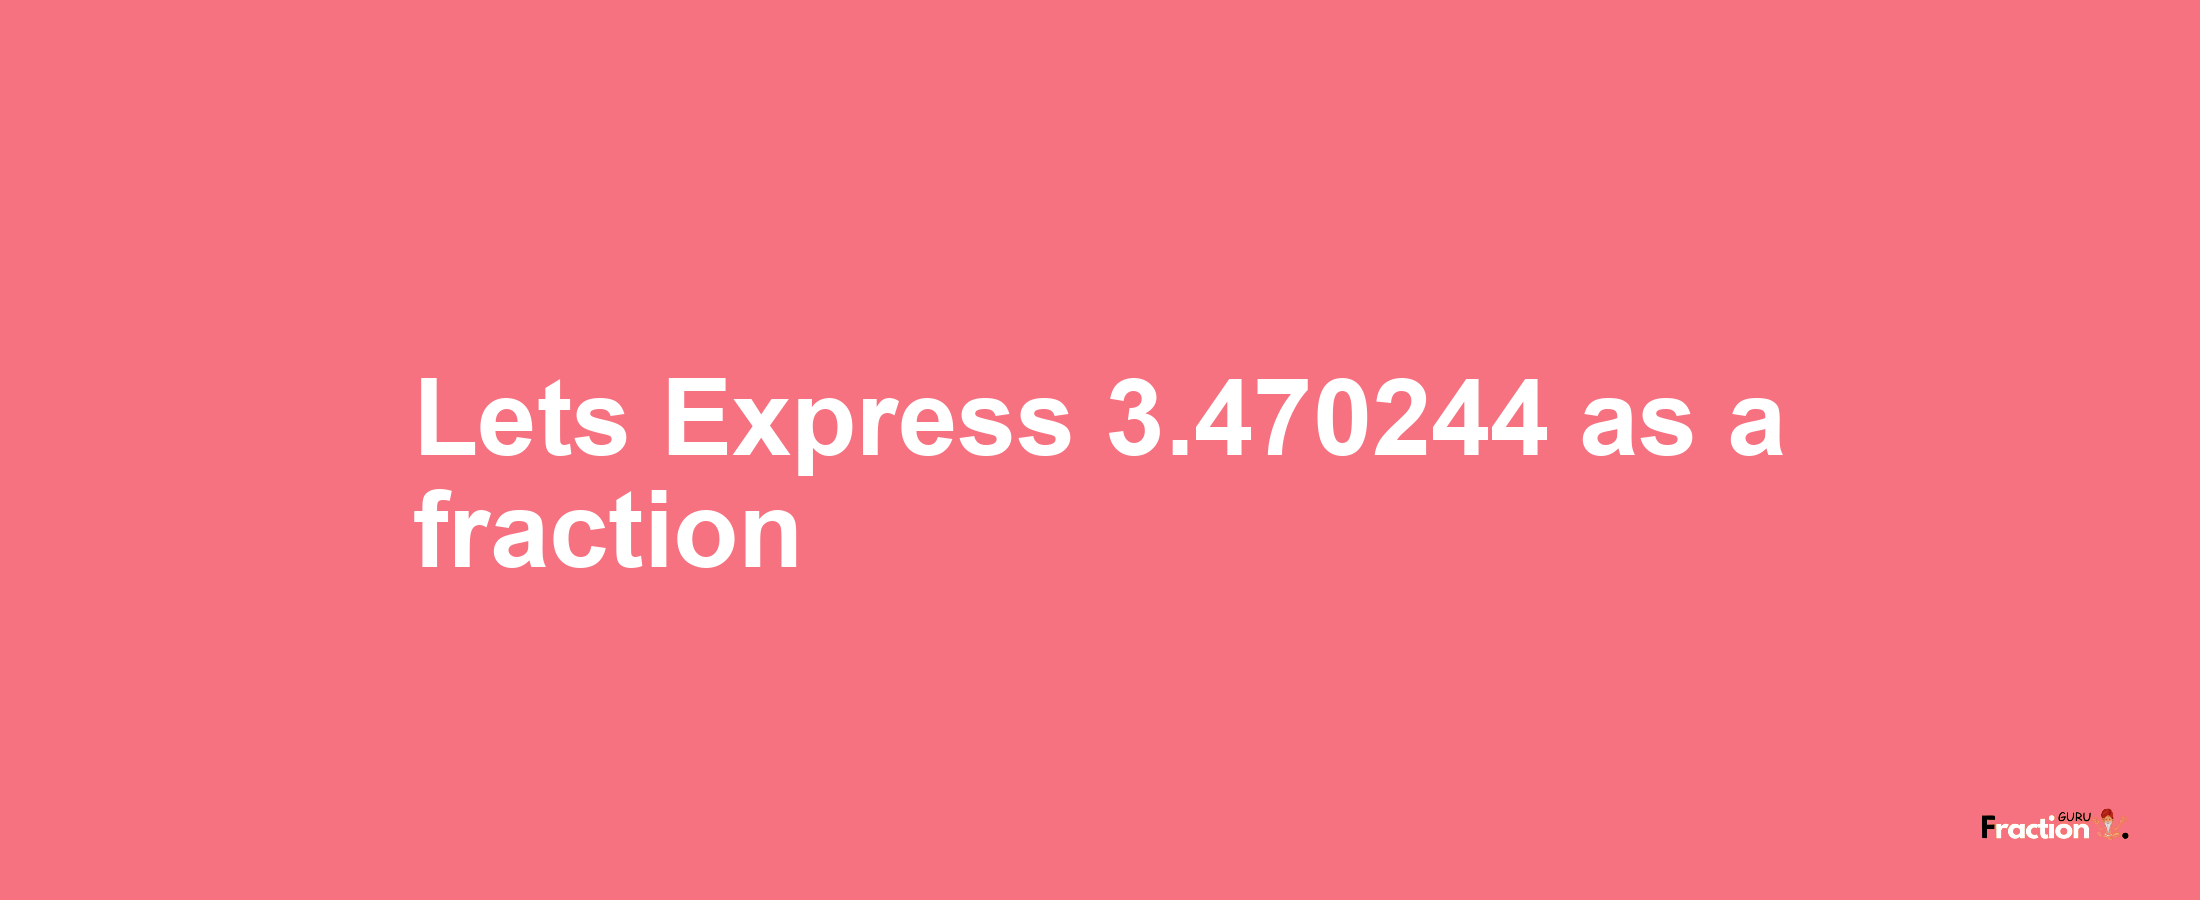 Lets Express 3.470244 as afraction